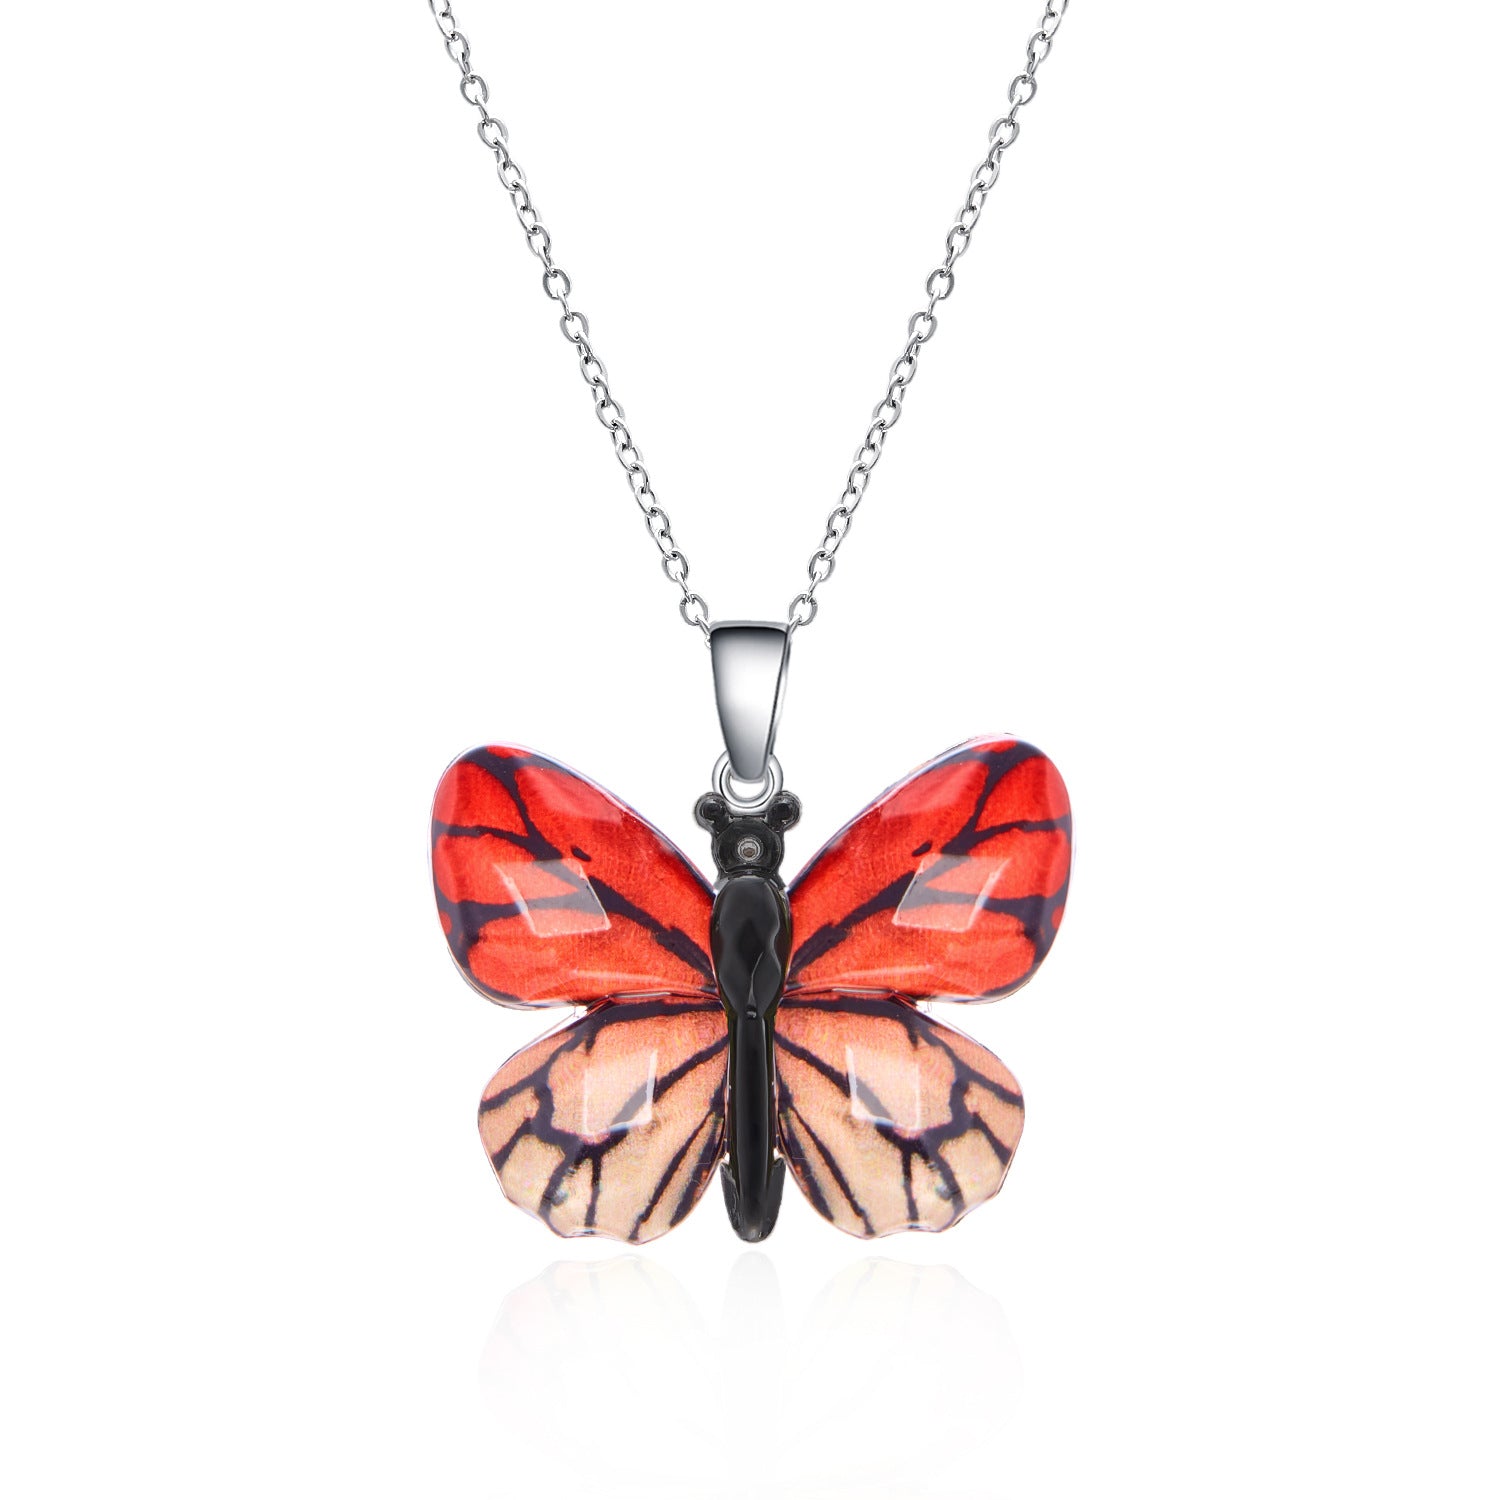 Women's Stainless Steel Retro Multi-color Butterfly Necklace